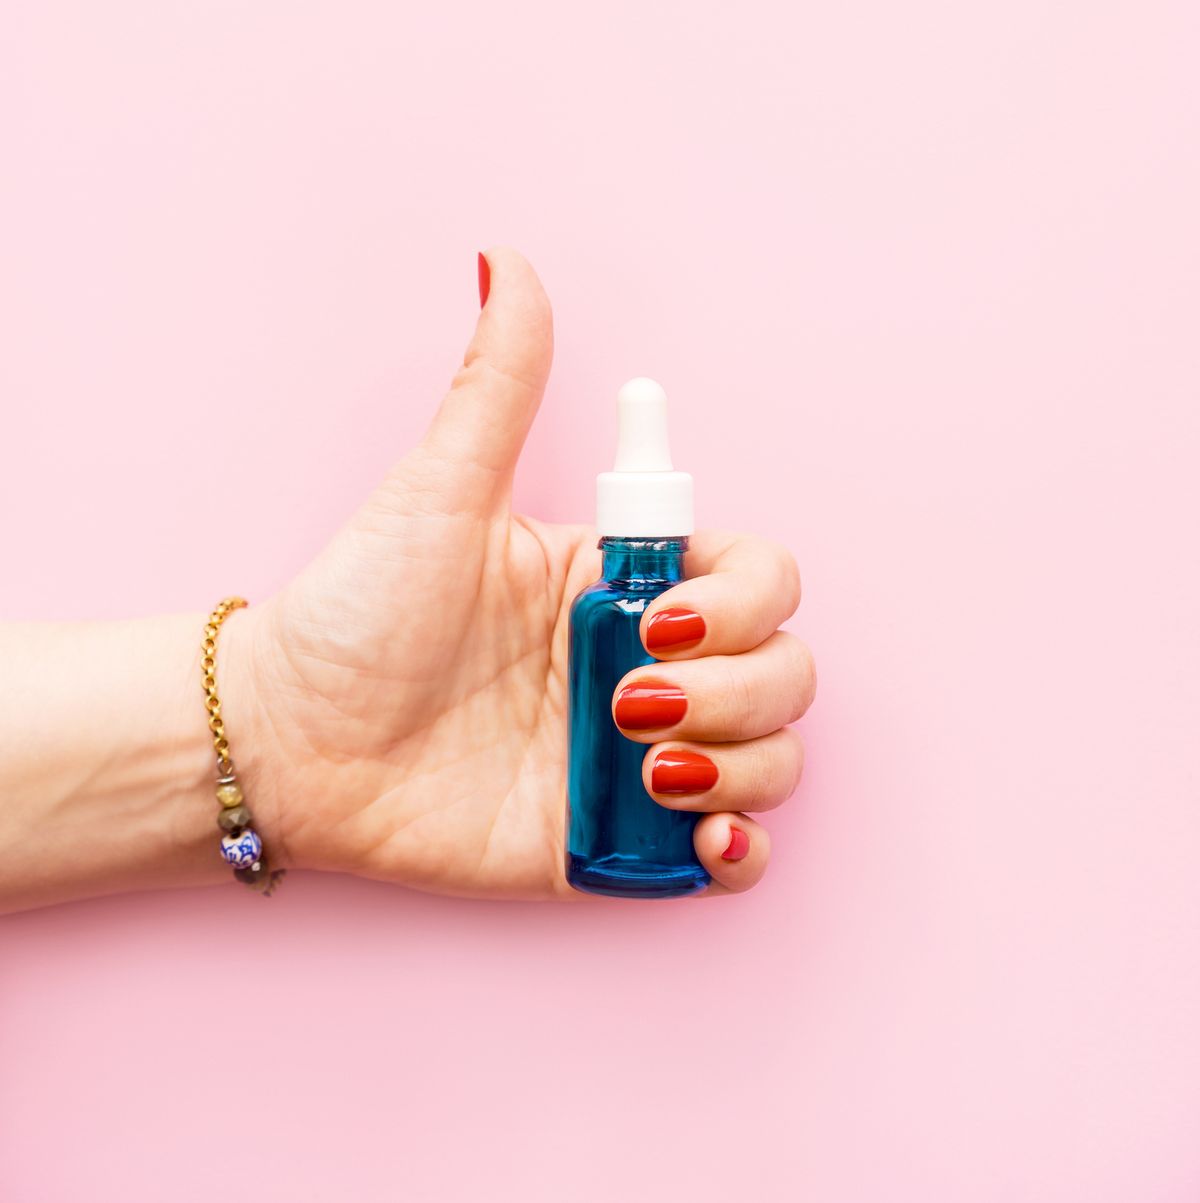 Hyaluronic acid and collagen bottle  in female hand